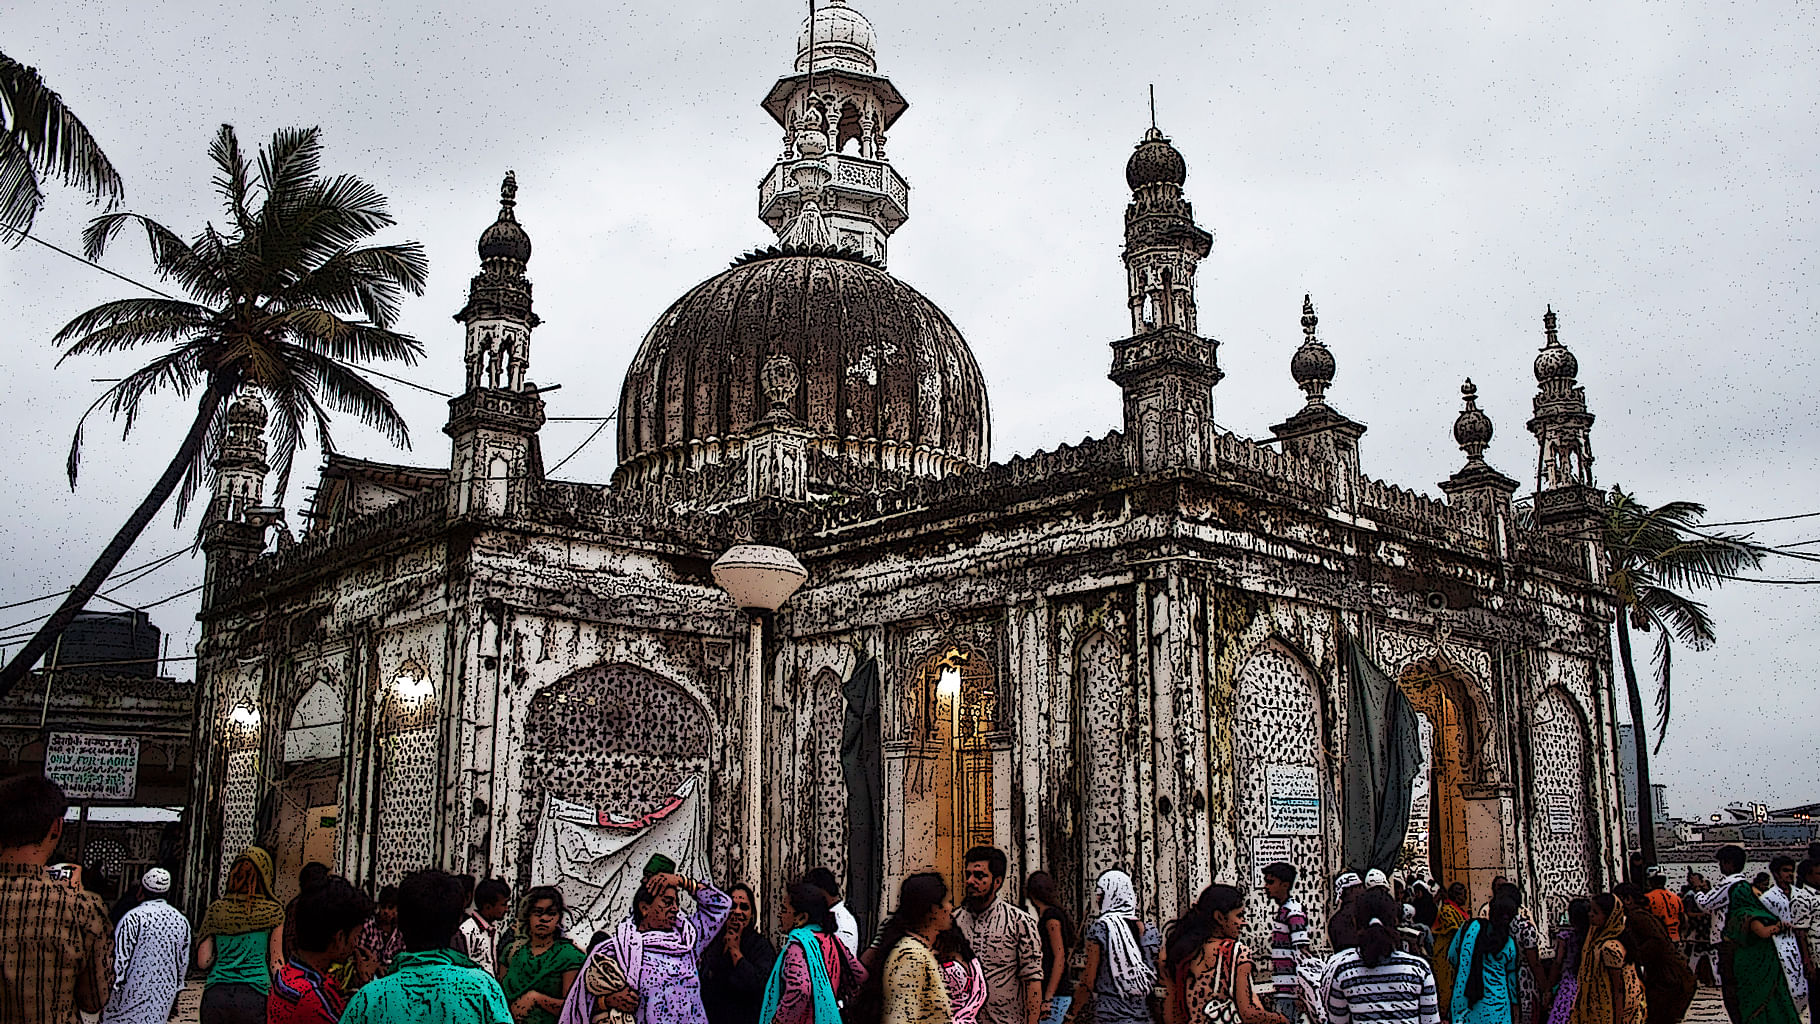 The Bombay High Court passed an ordering allowing the entry of women into the inner sanctum of the Haji Ali dargah in Mumbai. (Photo: iStock, Altered by <b>The Quint</b>)